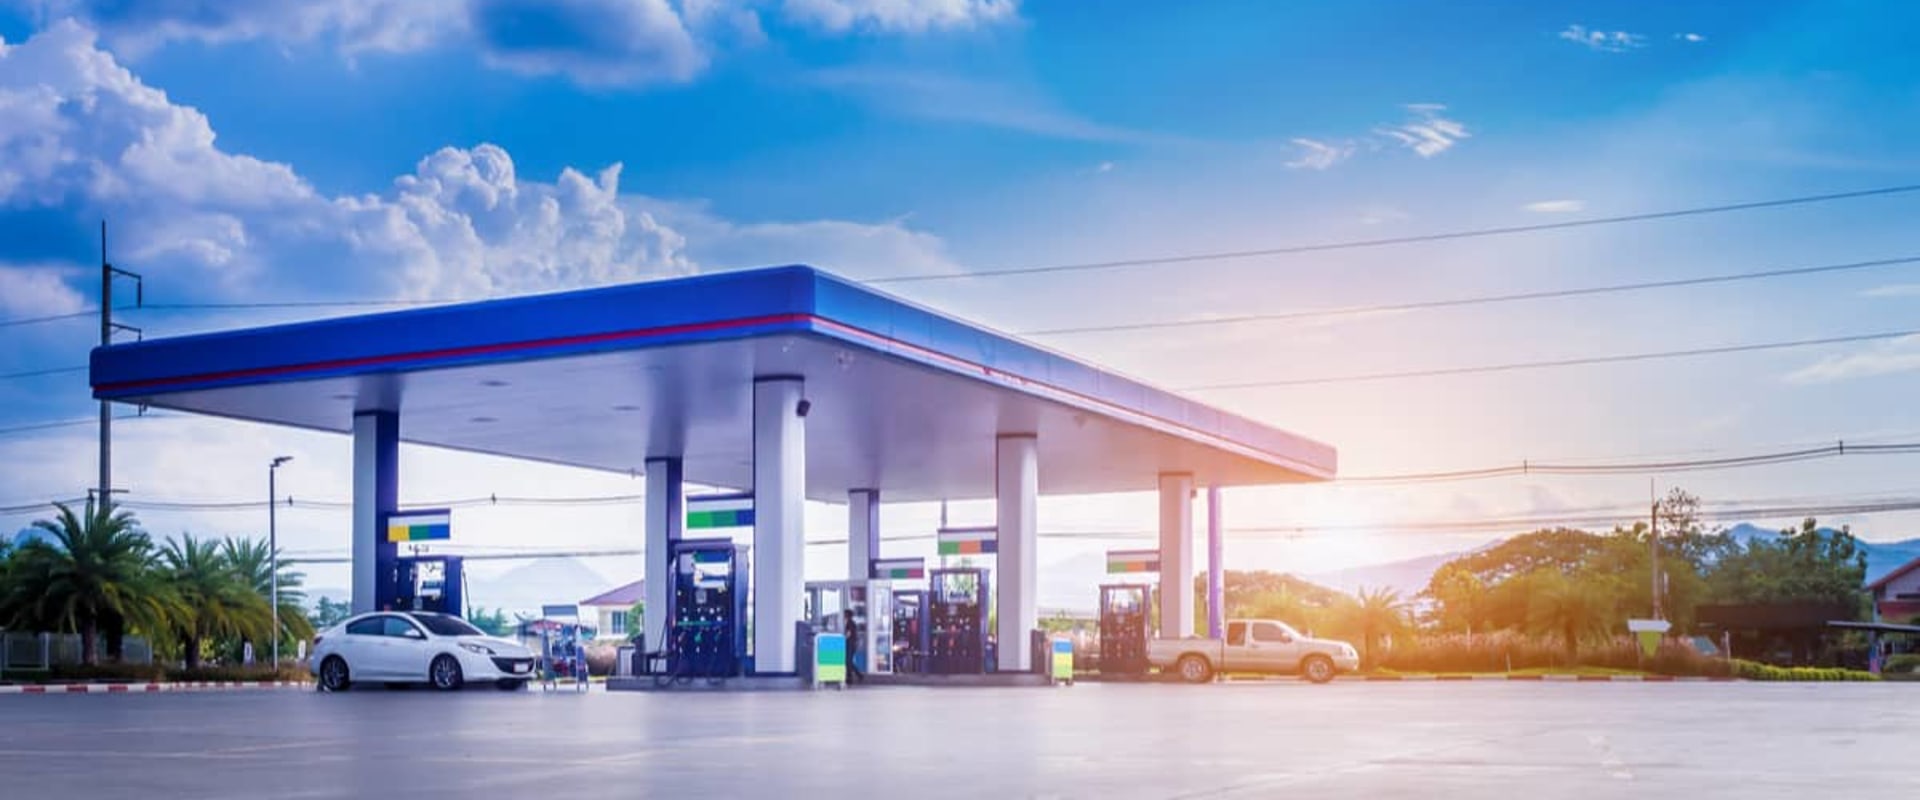 Which gas station has the highest quality?